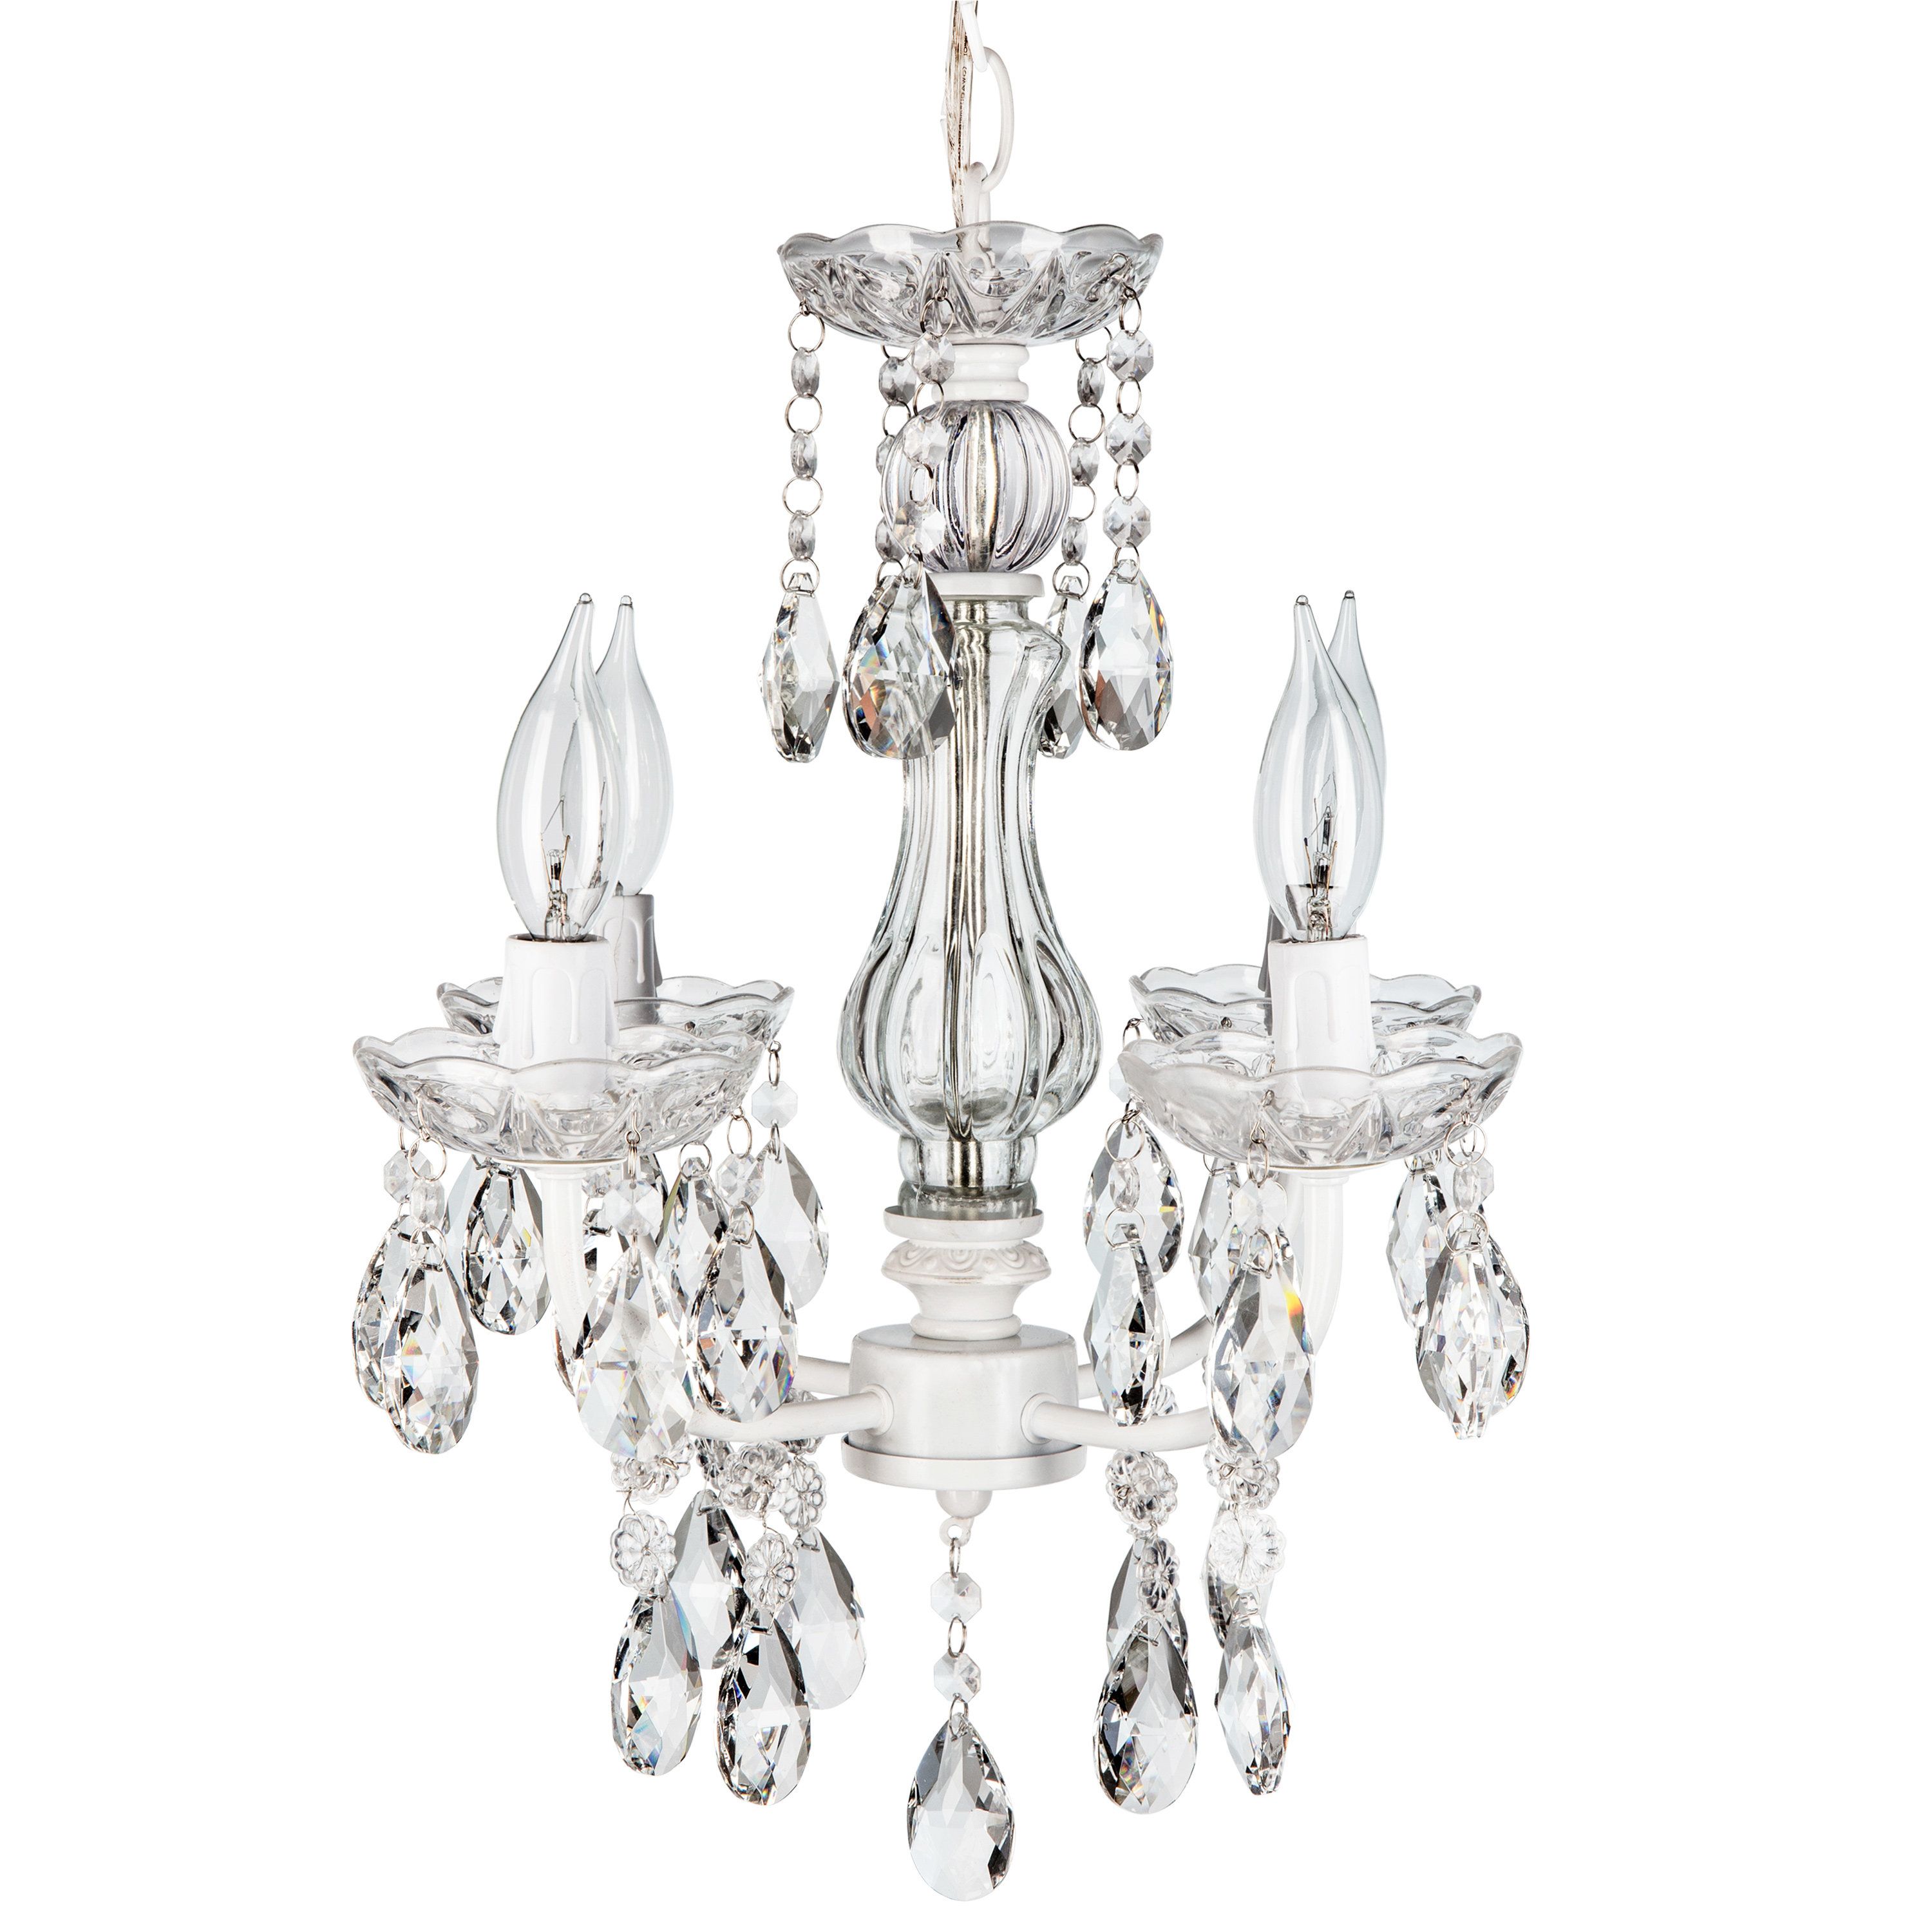 Blanchette White 4 Light Candle Style Chandelier With Regard To Blanchette 5 Light Candle Style Chandeliers (View 4 of 30)